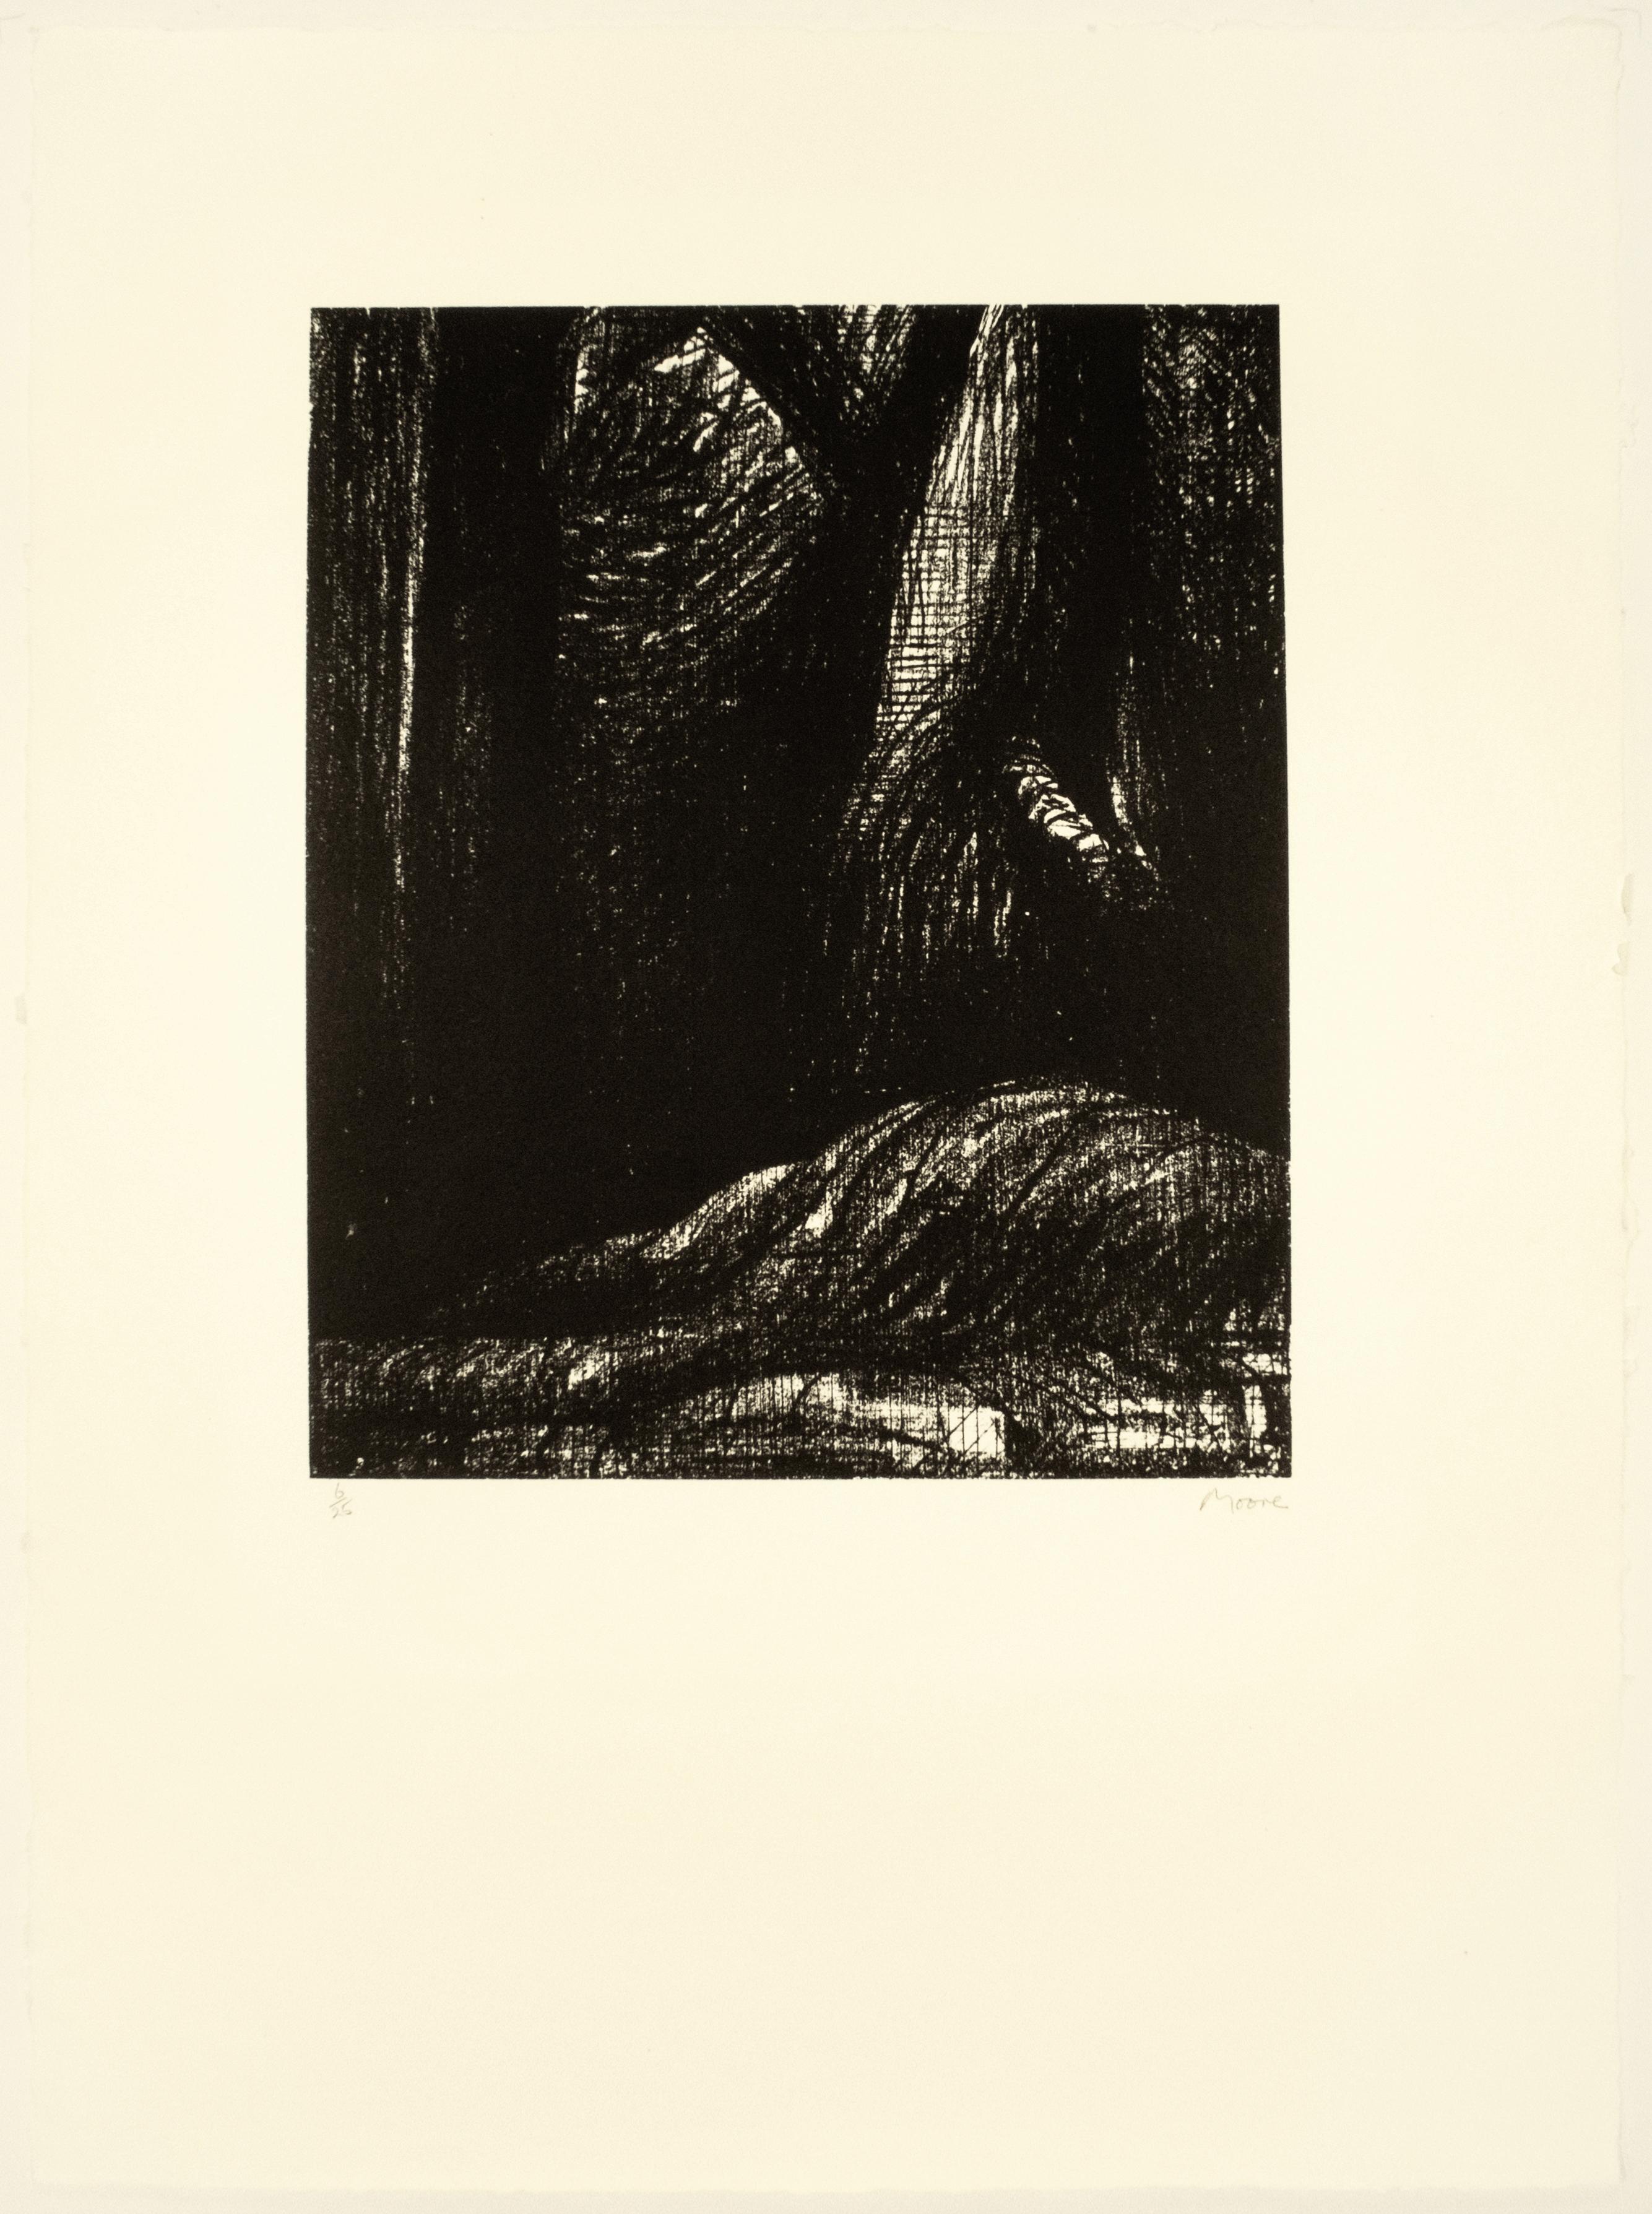 The Cavern: abstract black drawing based on Auden poetry and Yorkshire landscape - Print by Henry Moore